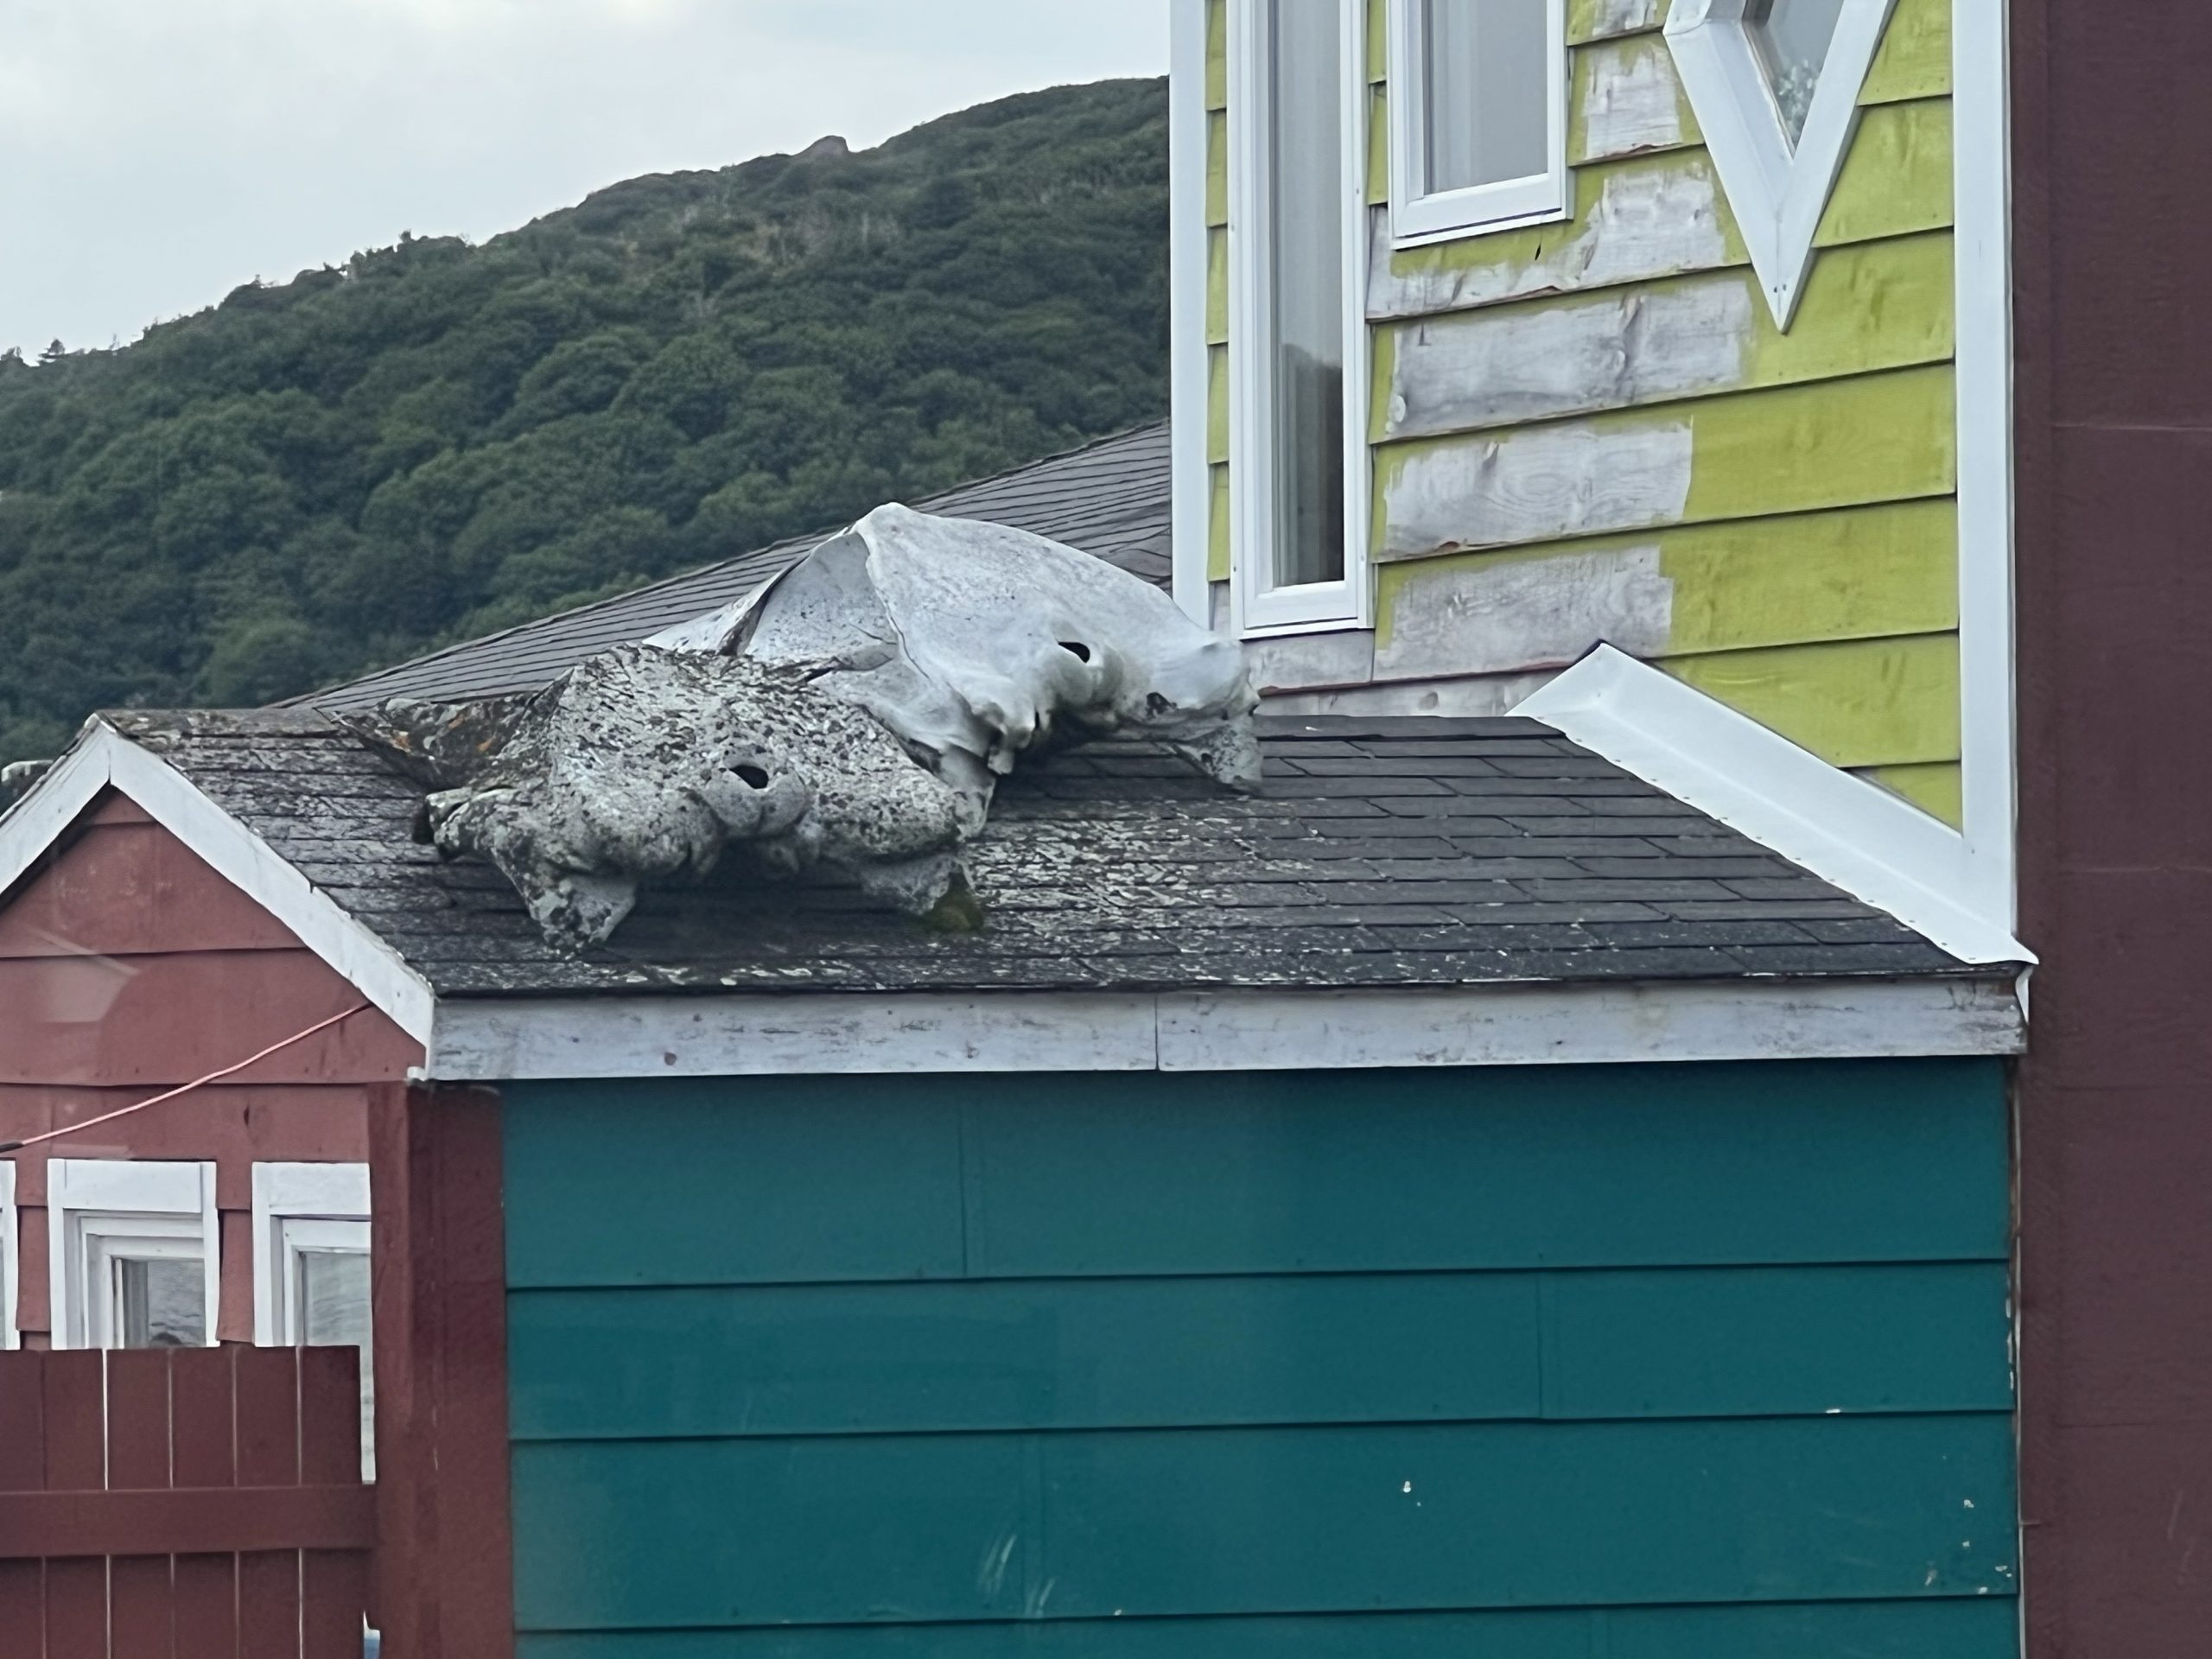 Welcome to Newfoundland, where your neighbor may be drying/bleaching humpback whale vertebrae on his shed roof.